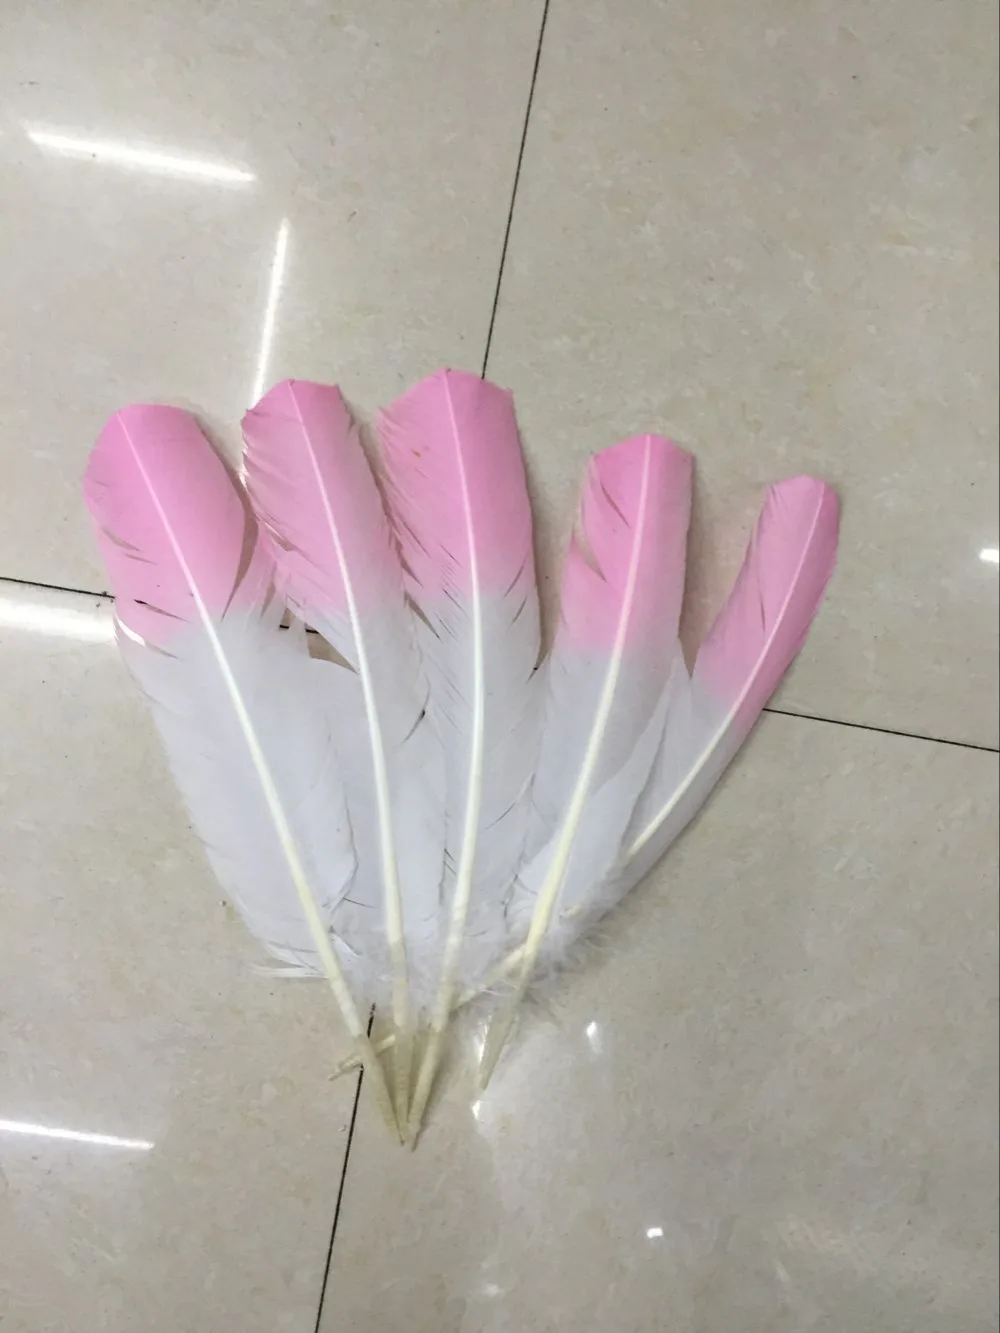 

50Pieces/lot!-LIGHT PINK Dipped Top Turkey Round Wing Quill Feathers,10-12inches 25-30cm long,freeshipping